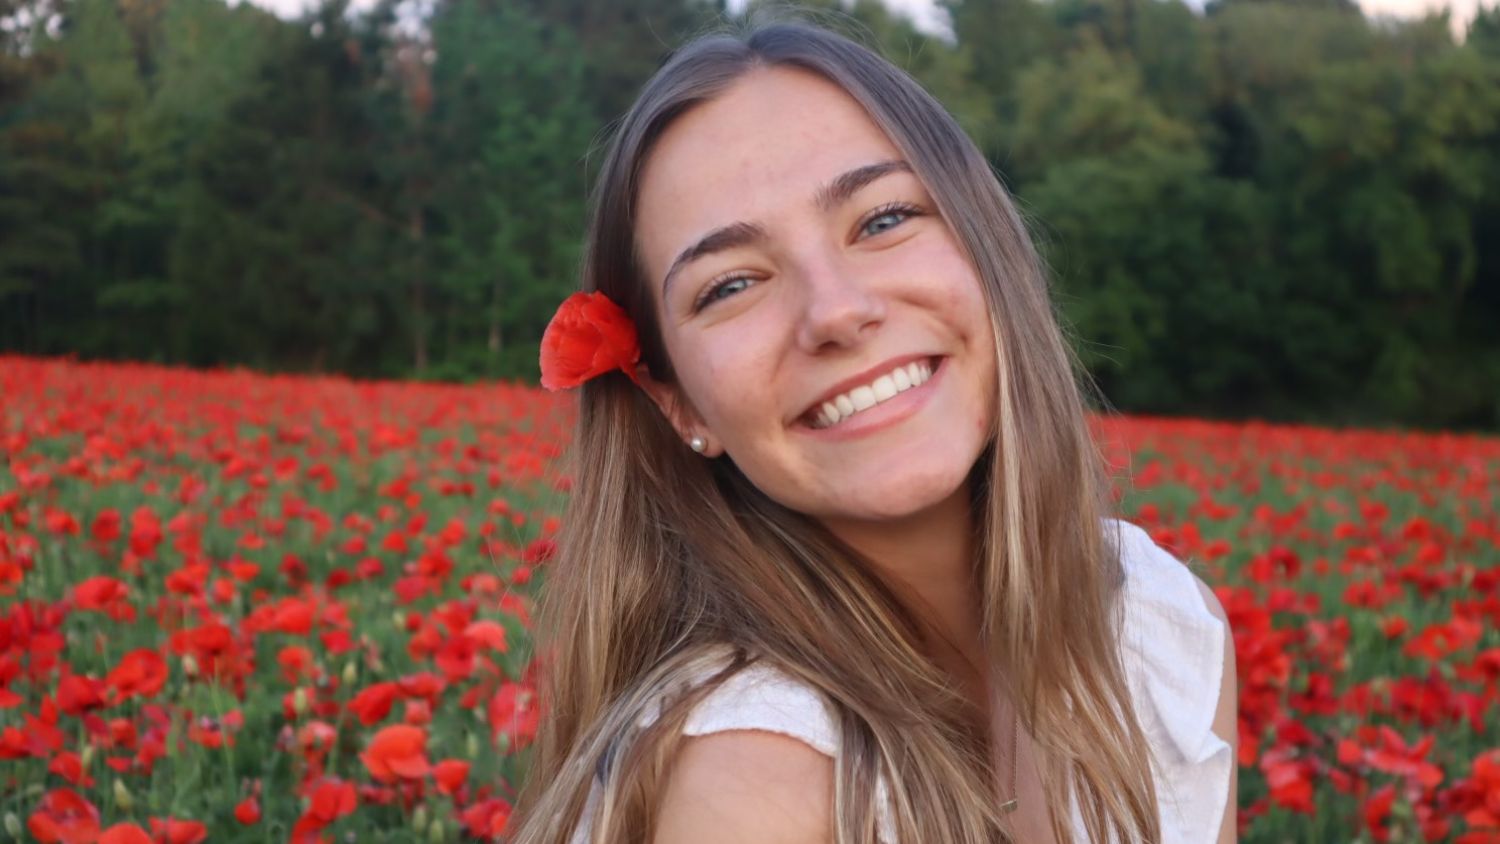 Sarah Grace smiling in a field of flowers